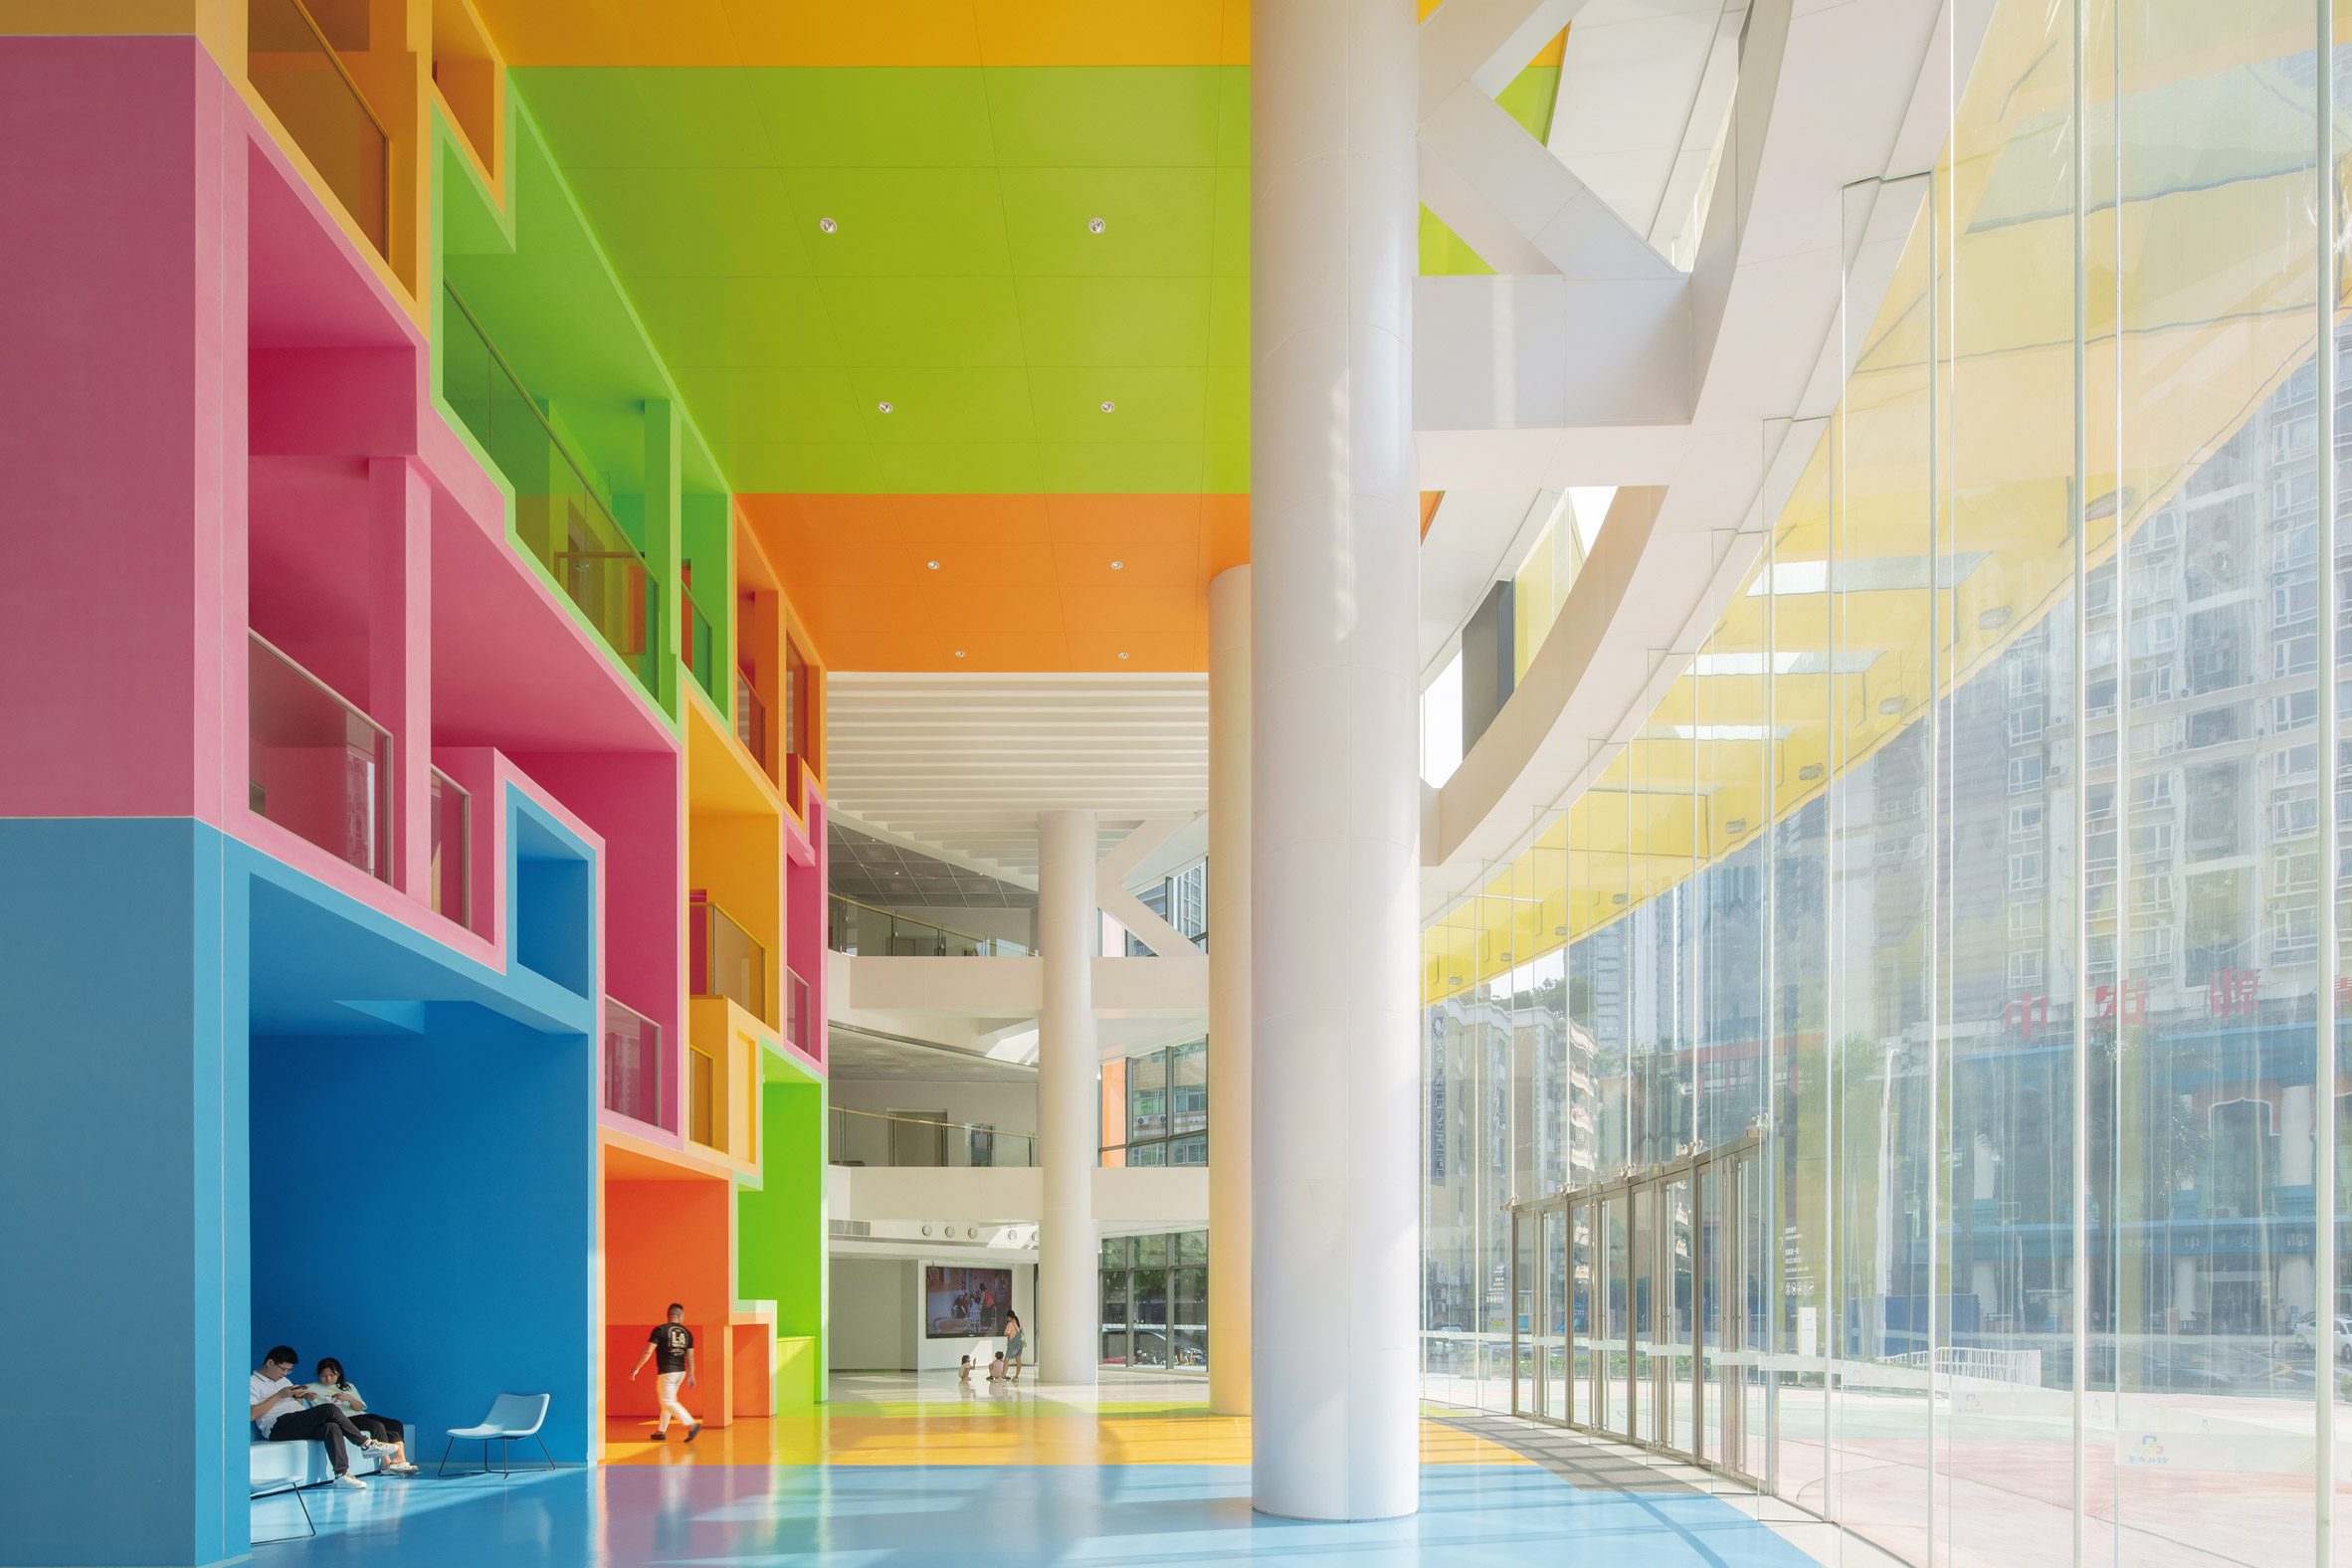 Brightly coloured lobby space at the Shenzhen Women and Children's Centre